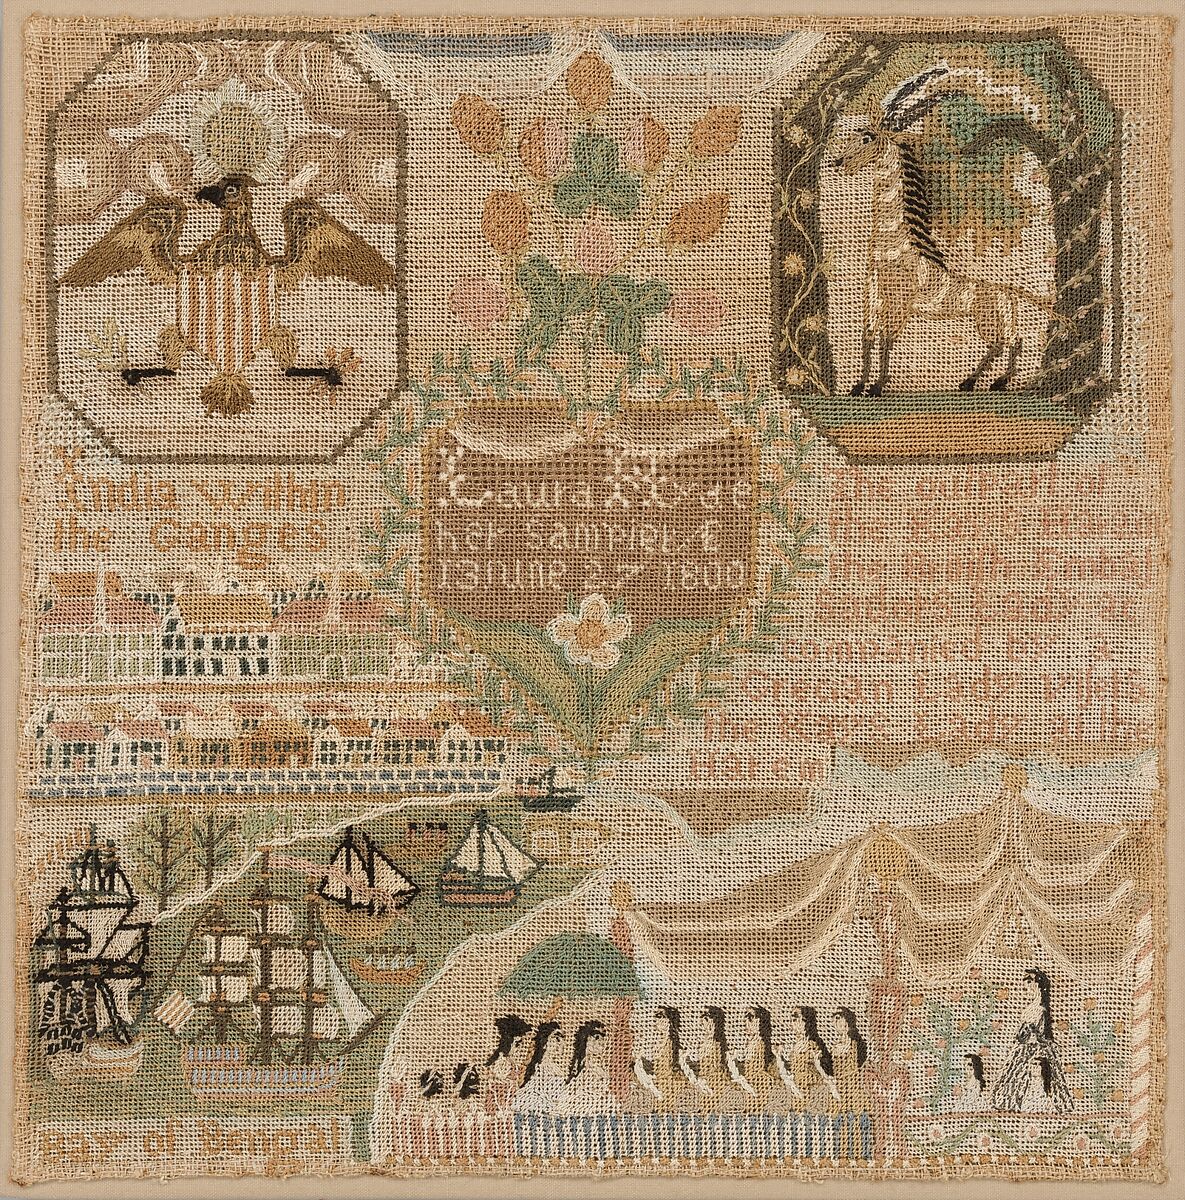 Sampler, Laura Hyde (American, 1787–1857), Silk embroidery on linen, American 